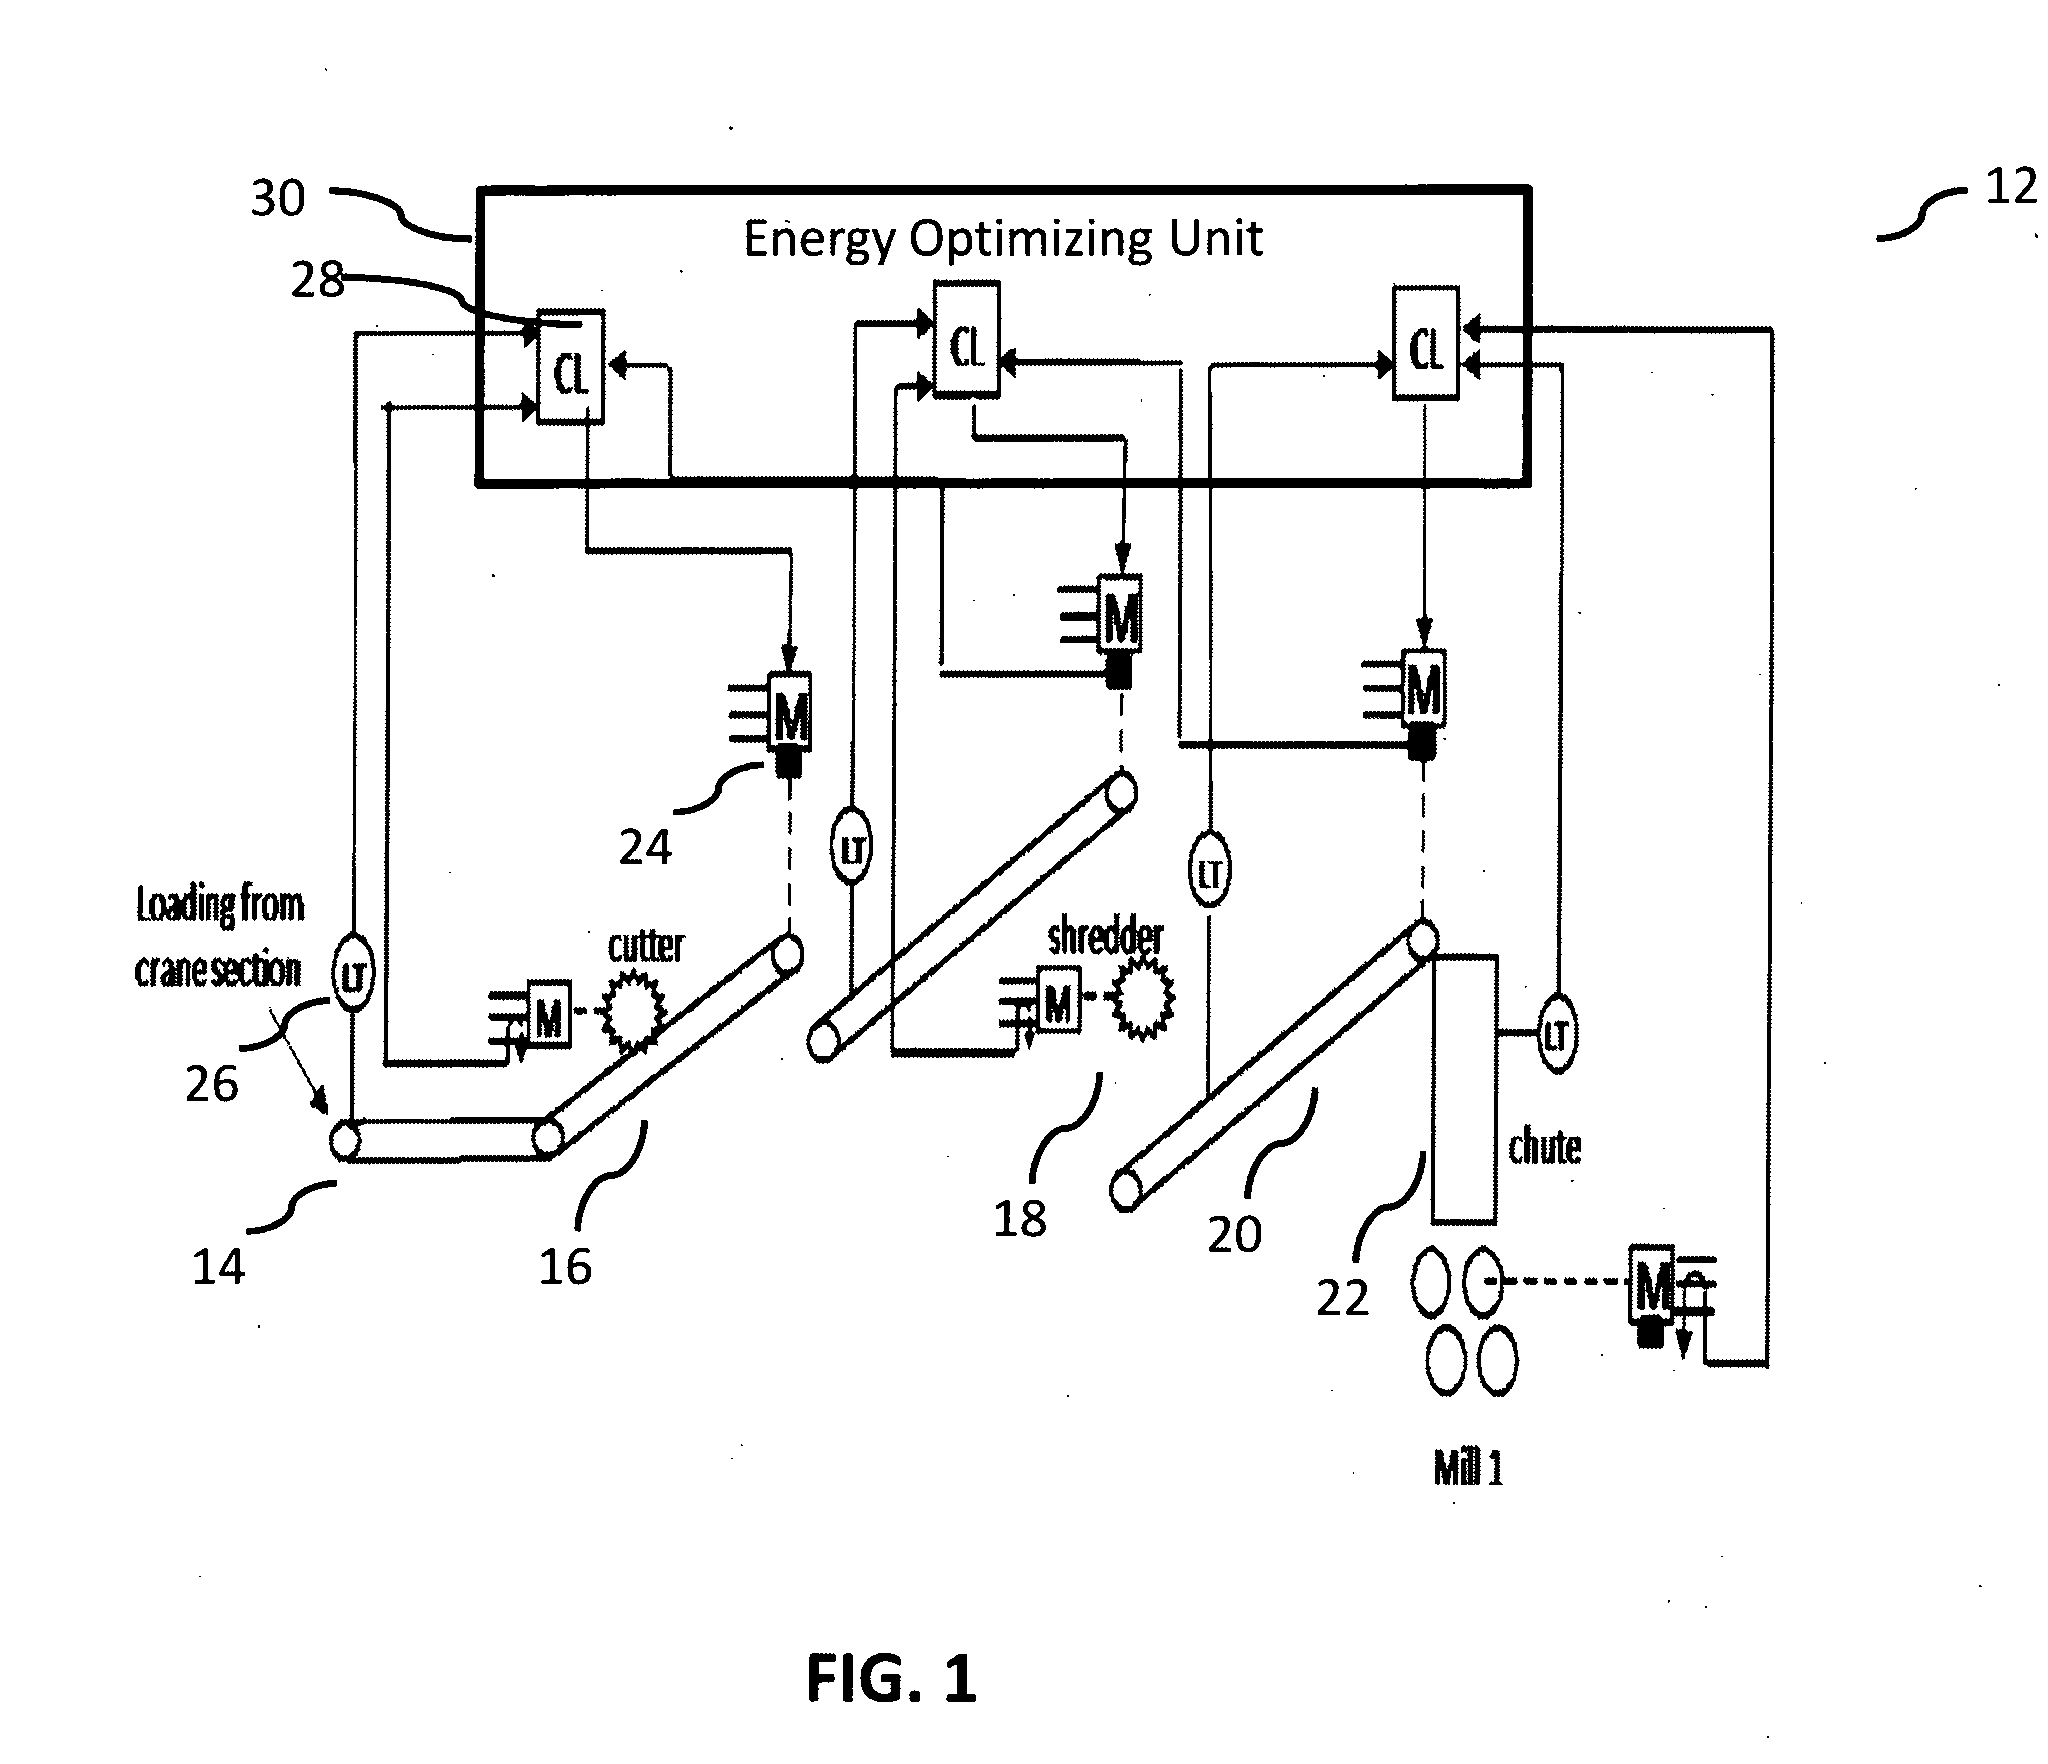 Cane preparation unit and method of operation